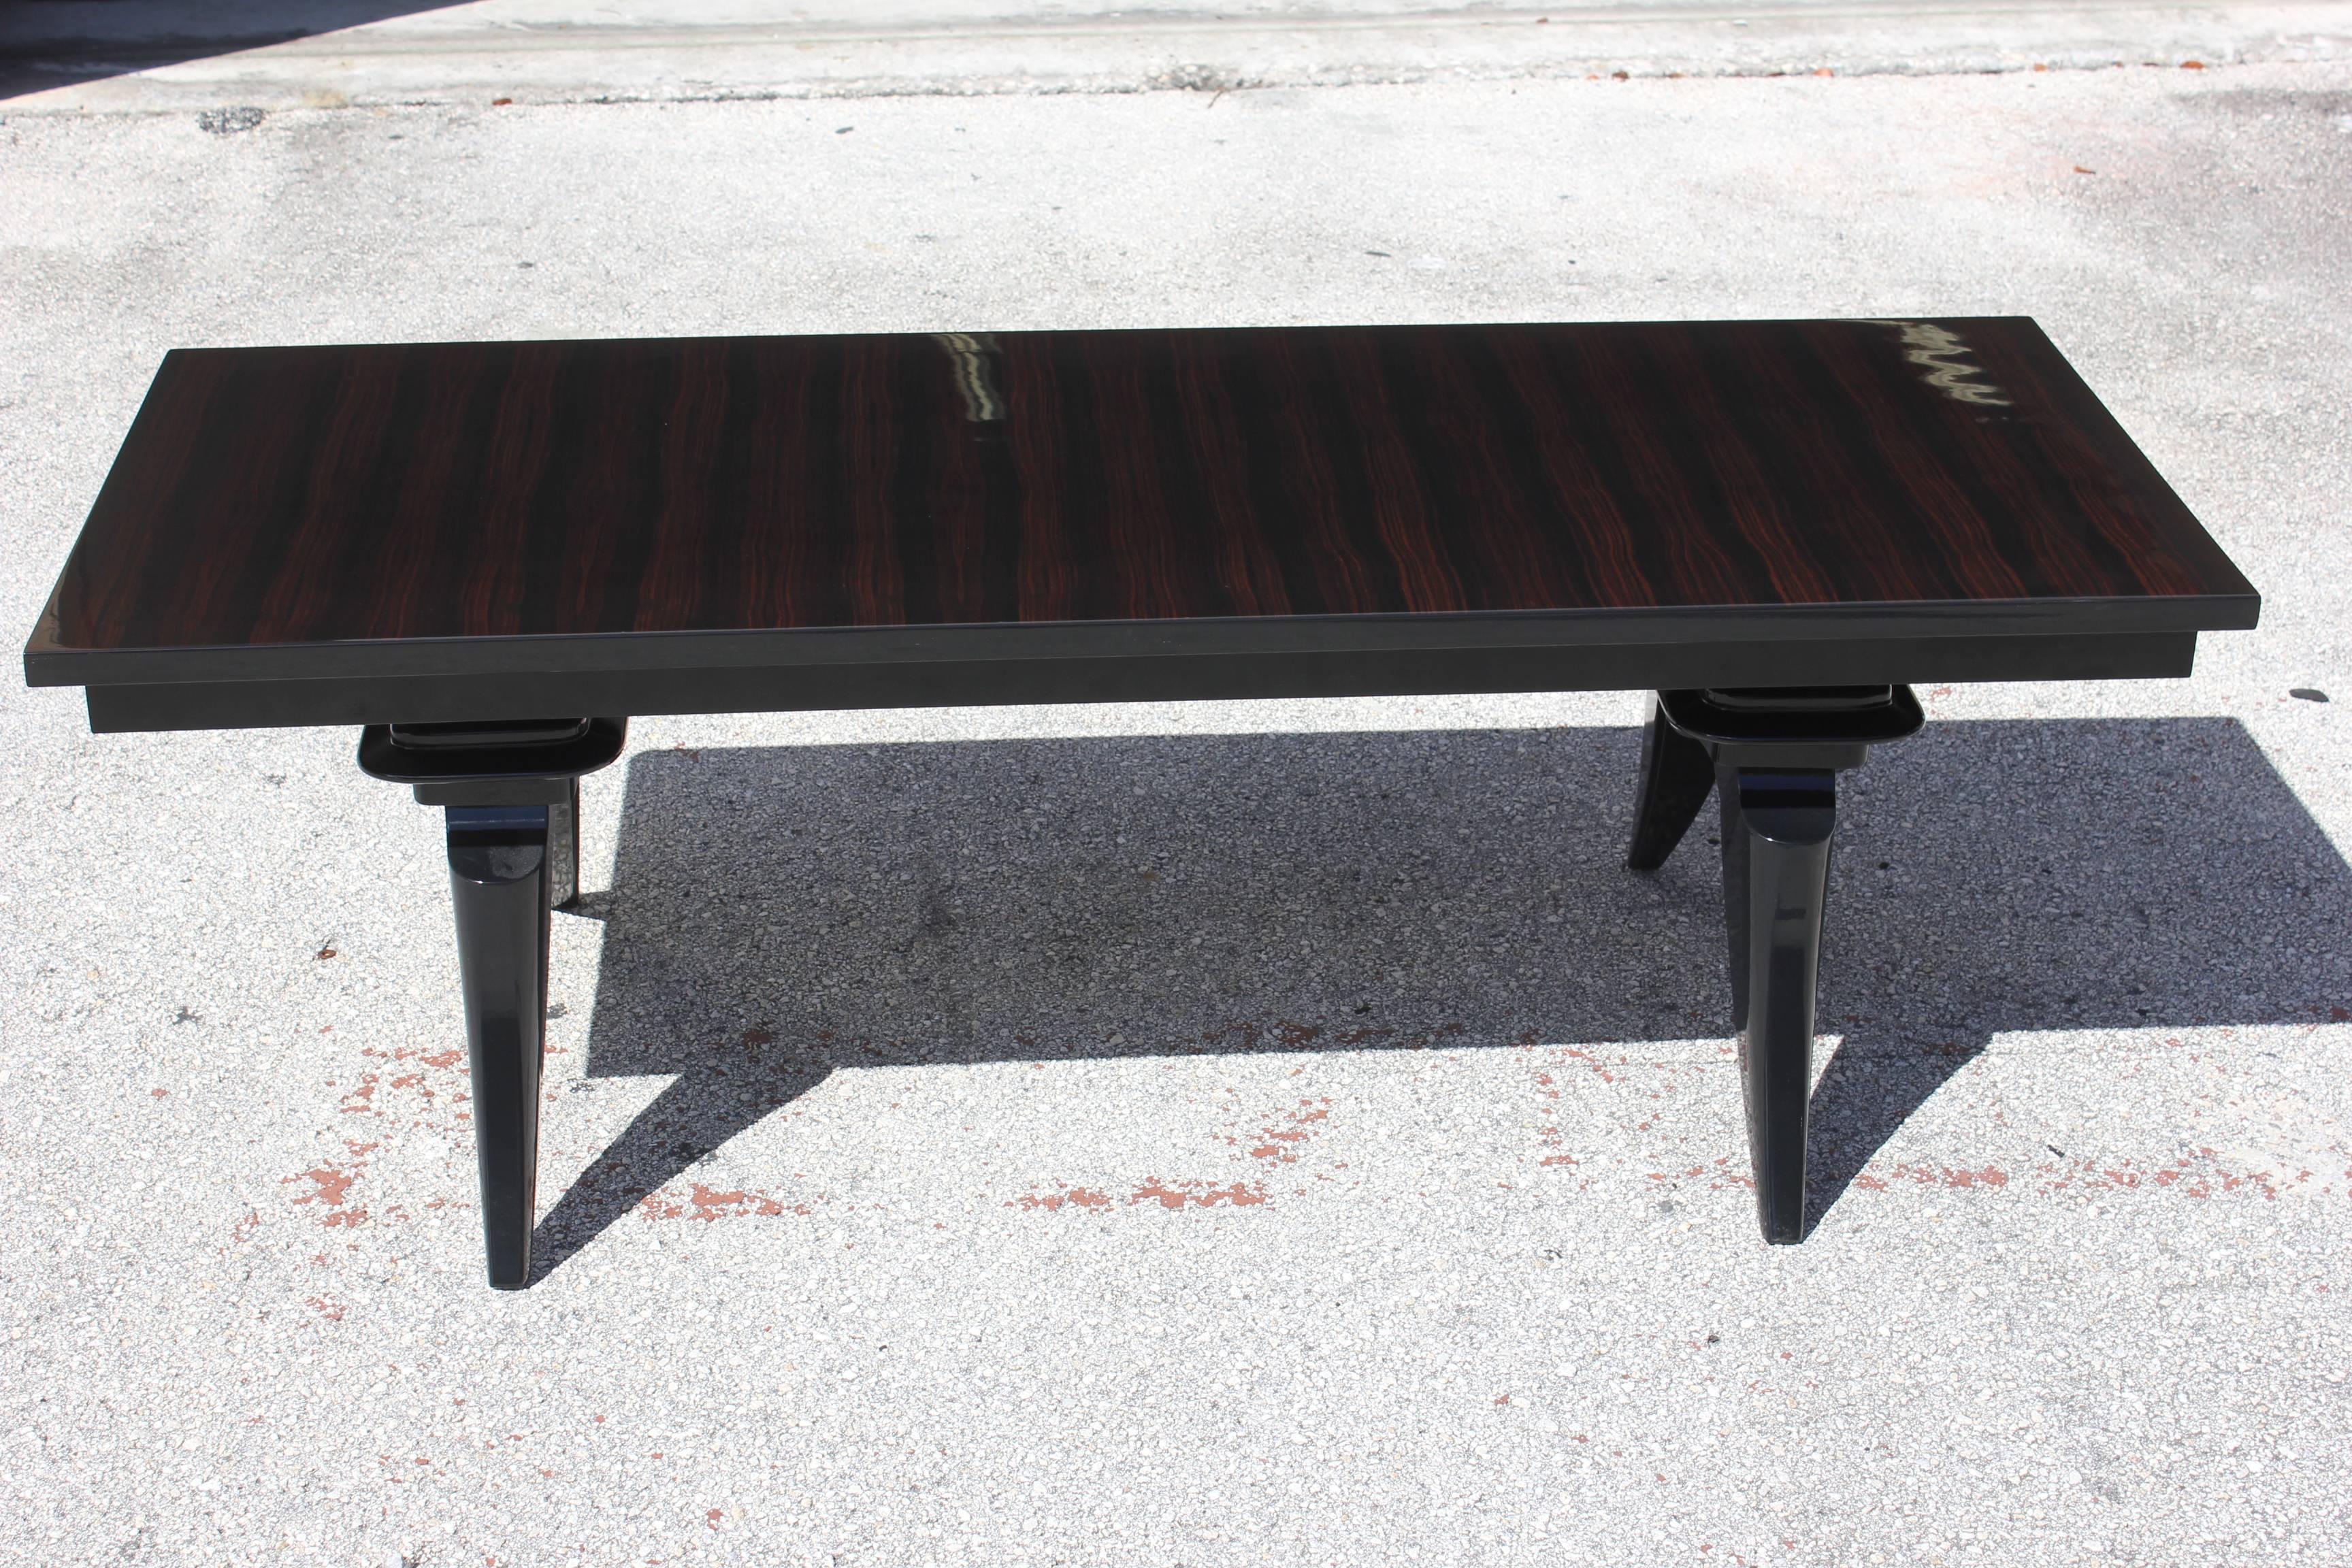 A stunning French Art Deco exotic Macassar Ebony coffee or cocktail table, circa 1940s. Black lacquer carved legs. Refinished and lacquered. This table is a French Estate piece.